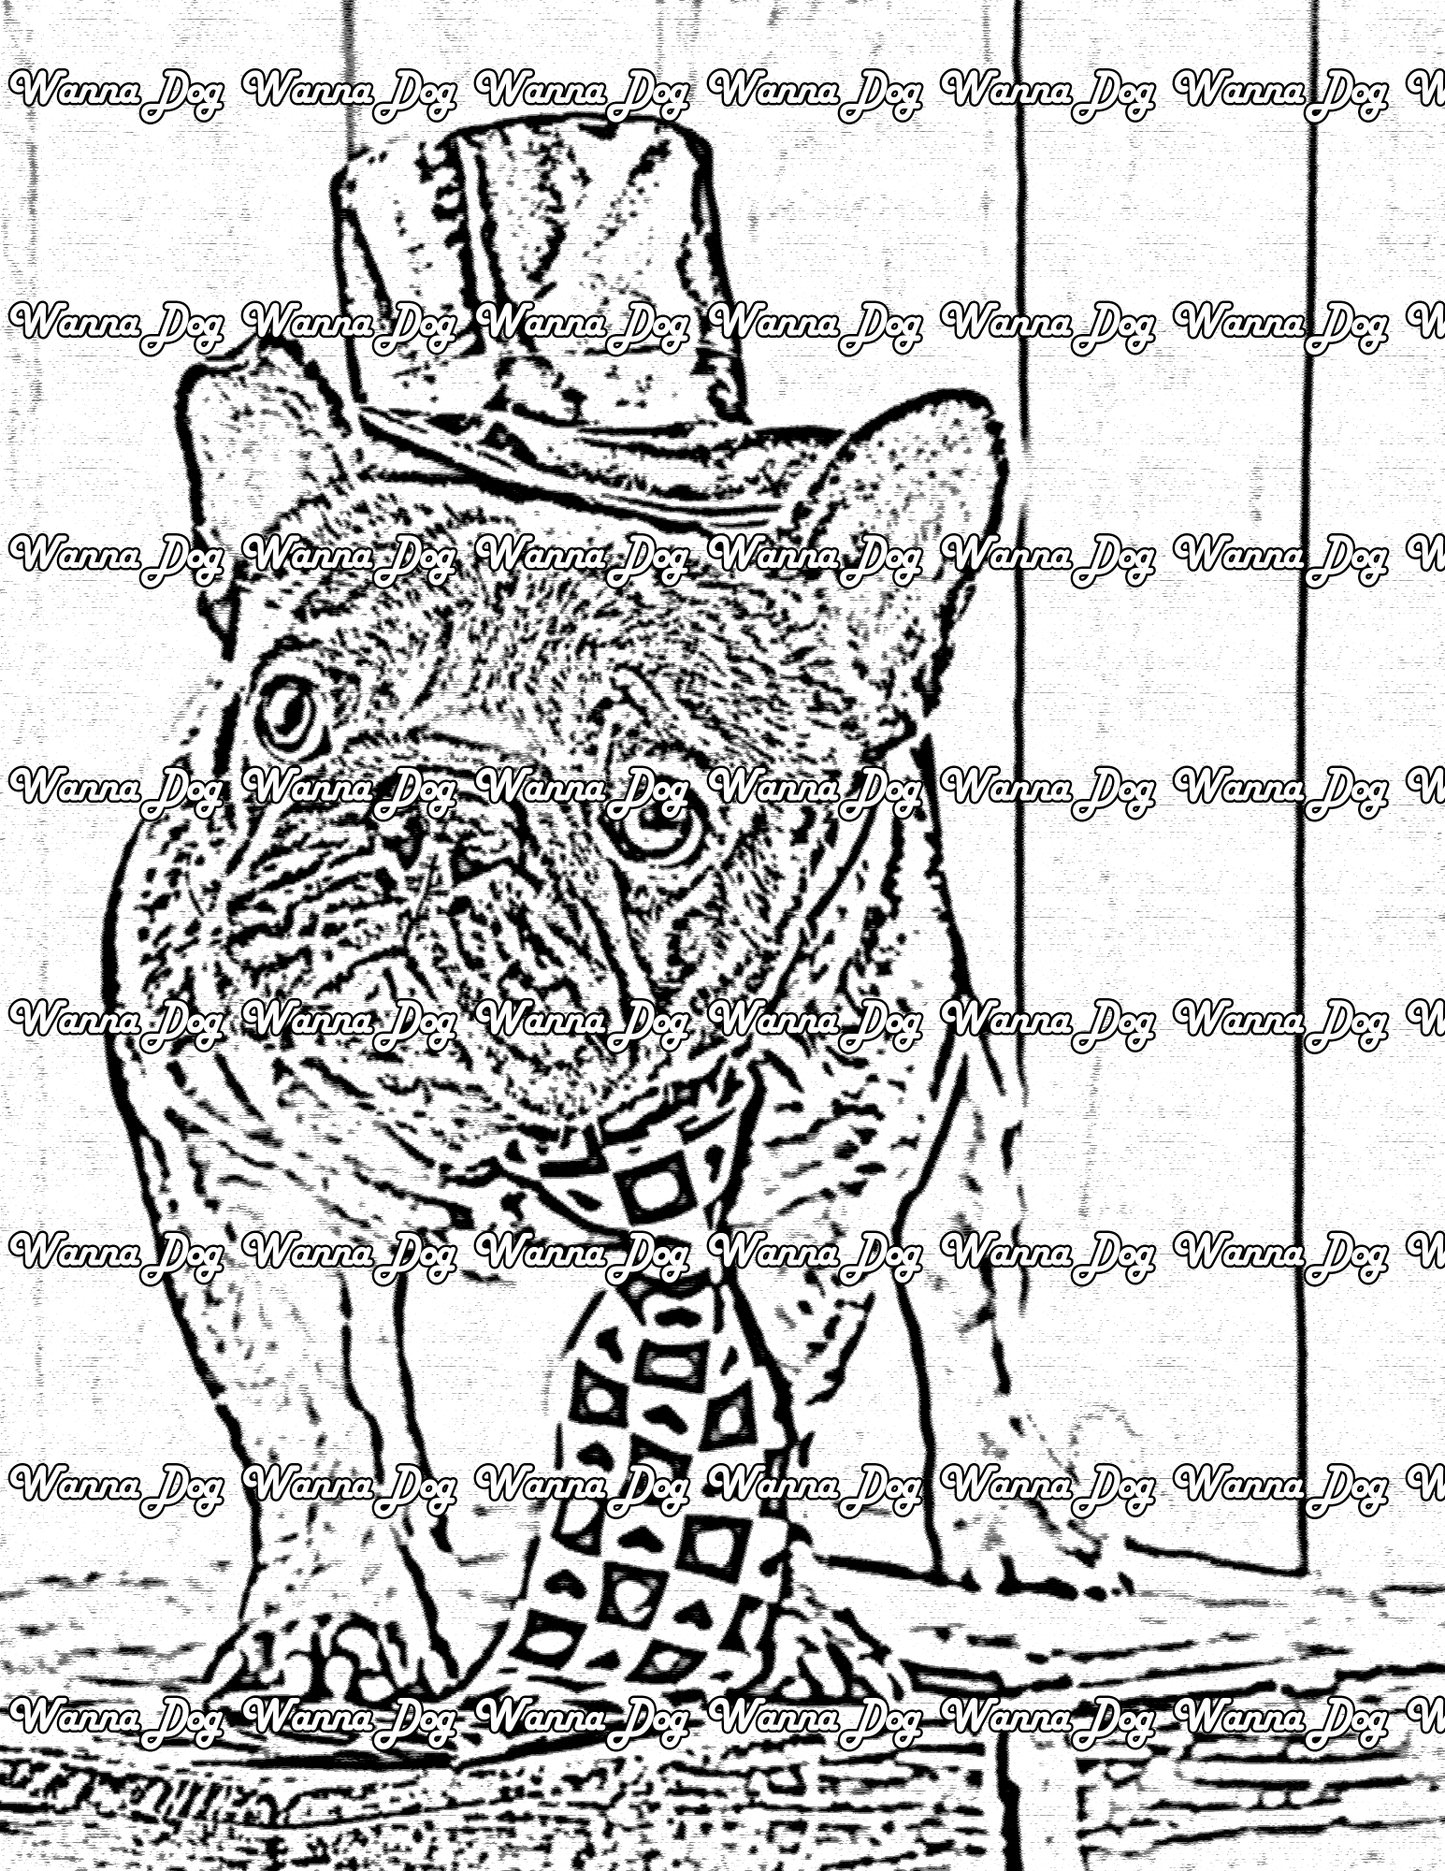 French Bulldog Coloring Page of a French Bulldog in a top hat and tie